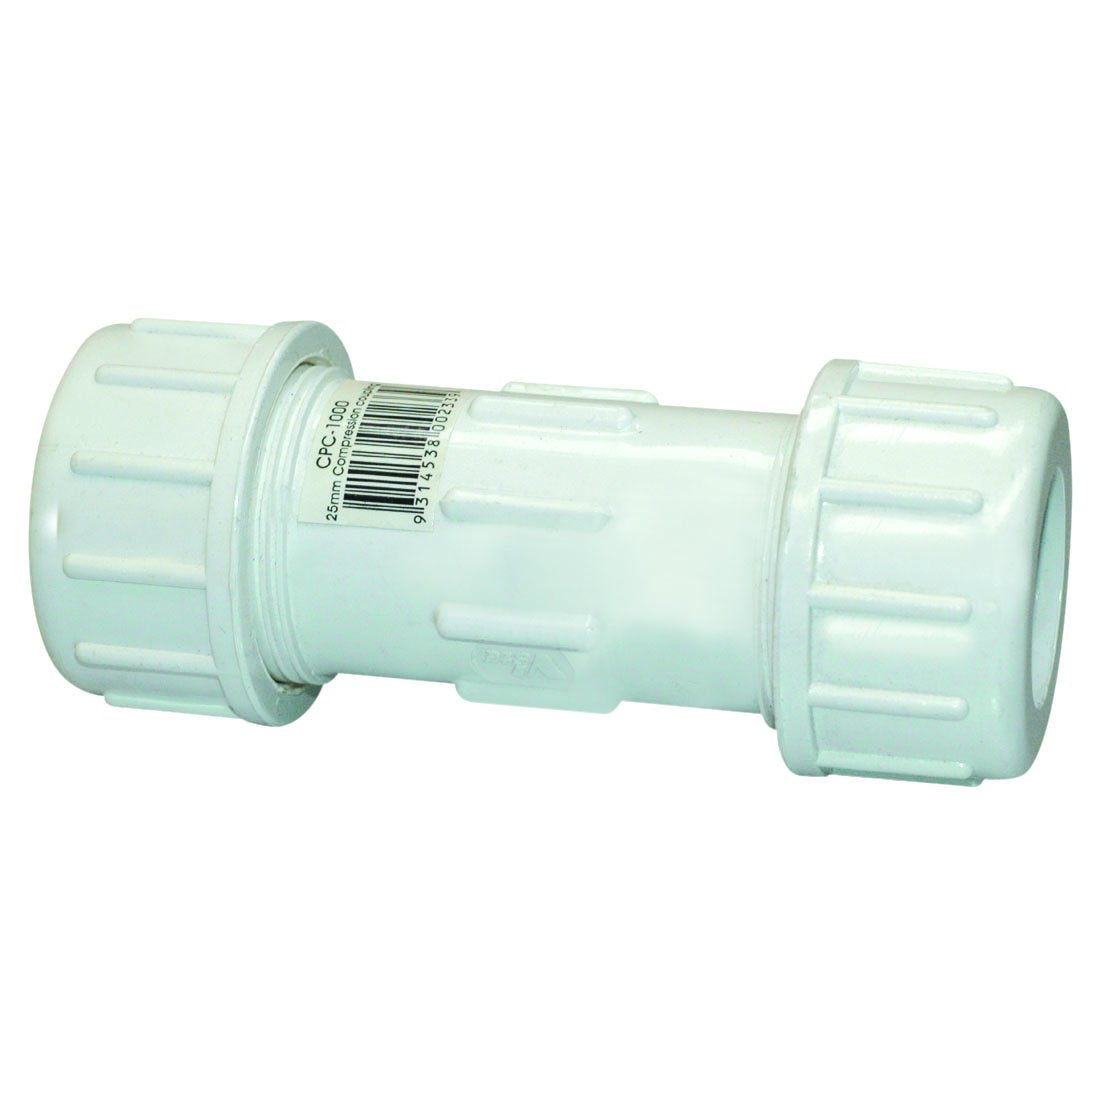 White PVC compression coupling fitting